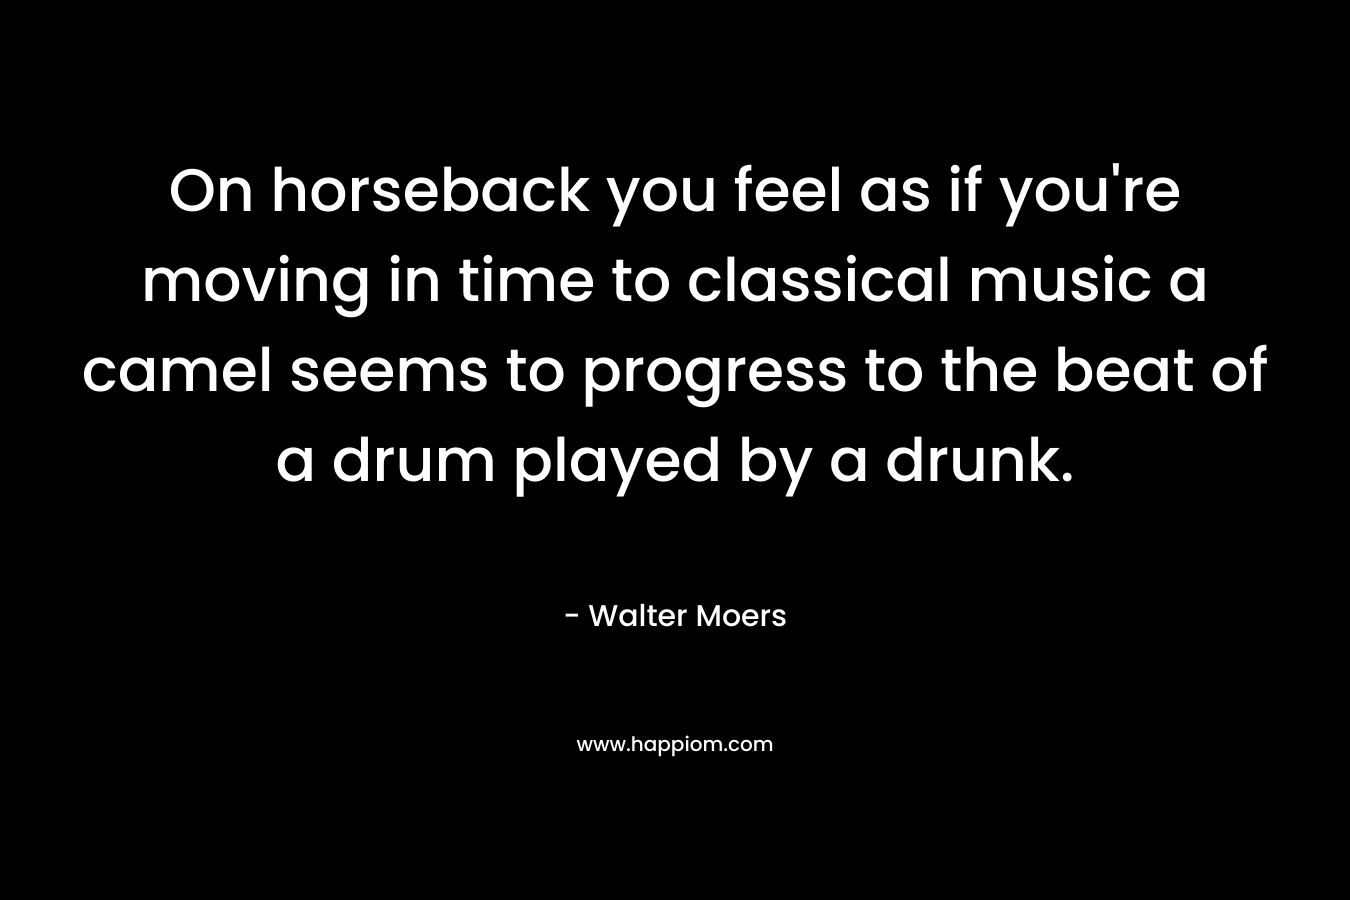 On horseback you feel as if you're moving in time to classical music a camel seems to progress to the beat of a drum played by a drunk. 